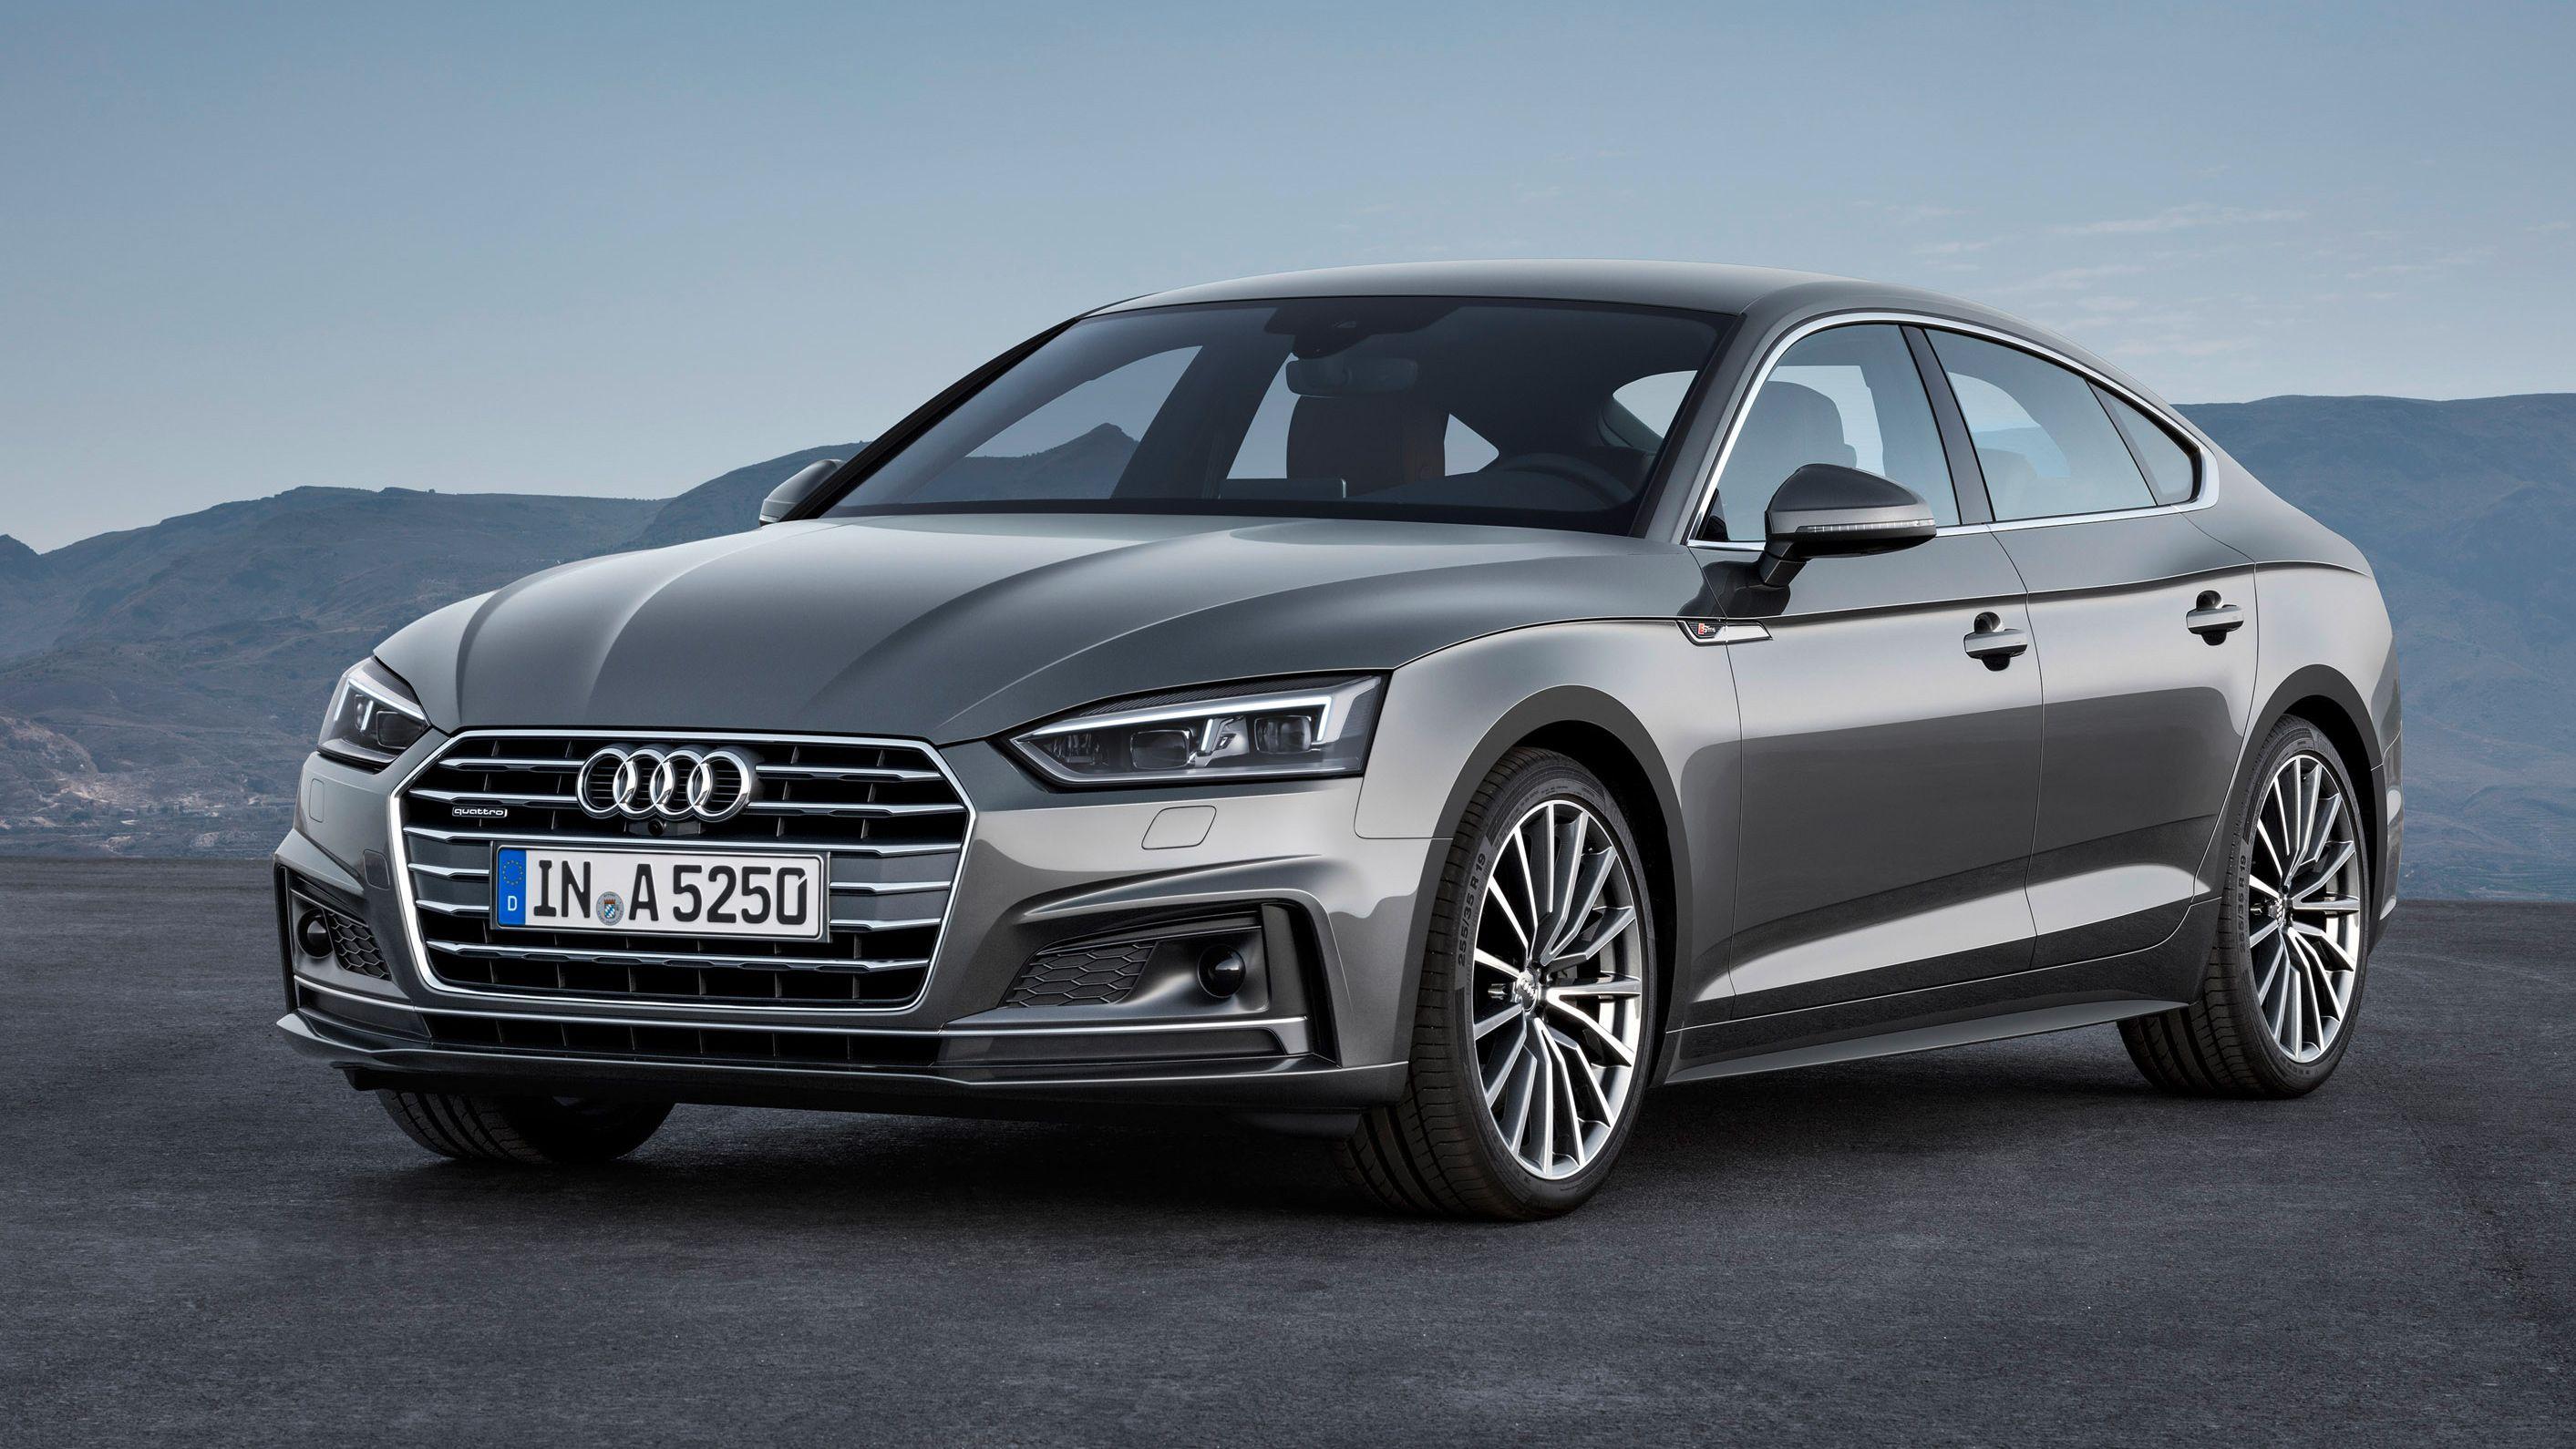 Sensational Audi A6 HD Photo on with HD Resolution 3840x2400